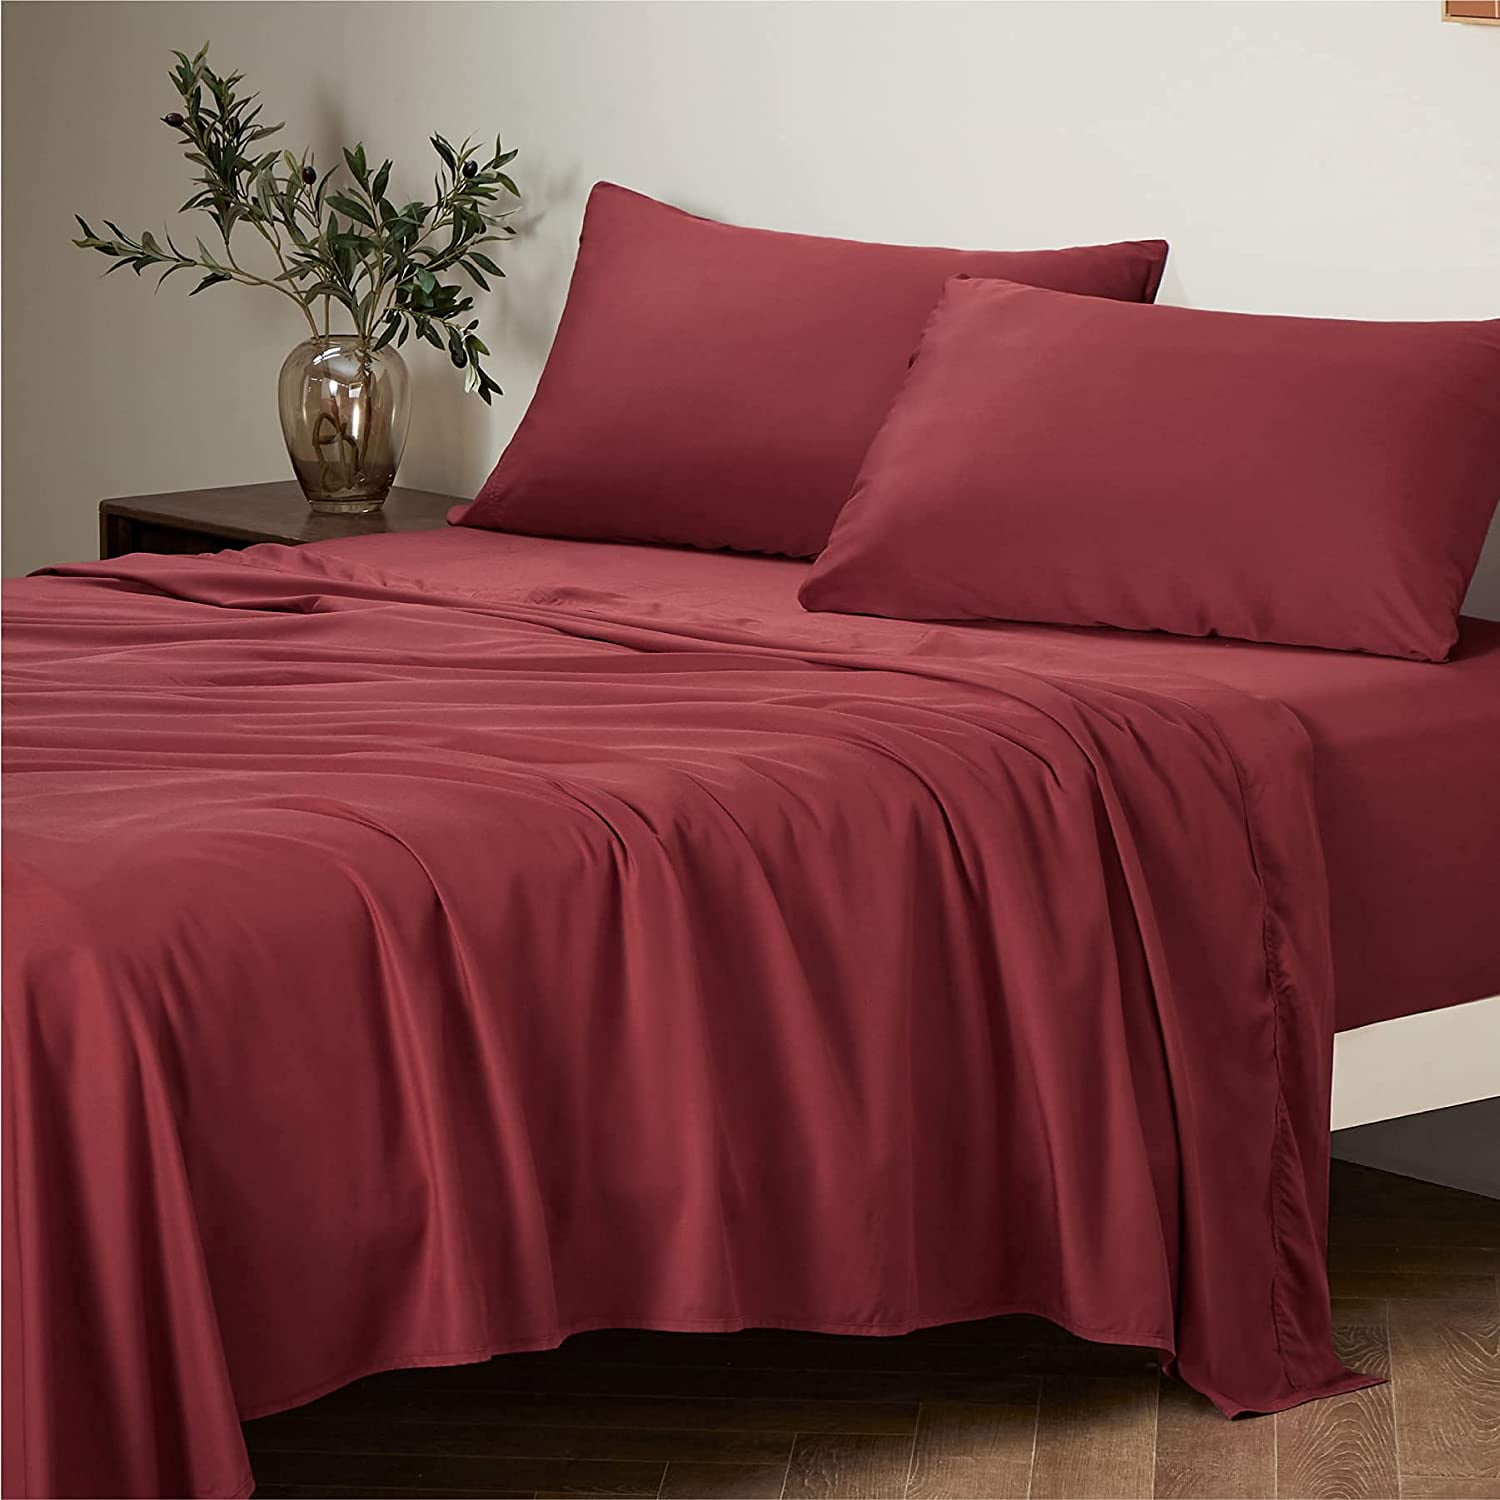 Bedding Collection 1900 Count Sheet Set Fitted 15" Deep Pocket Burgundy Solid 